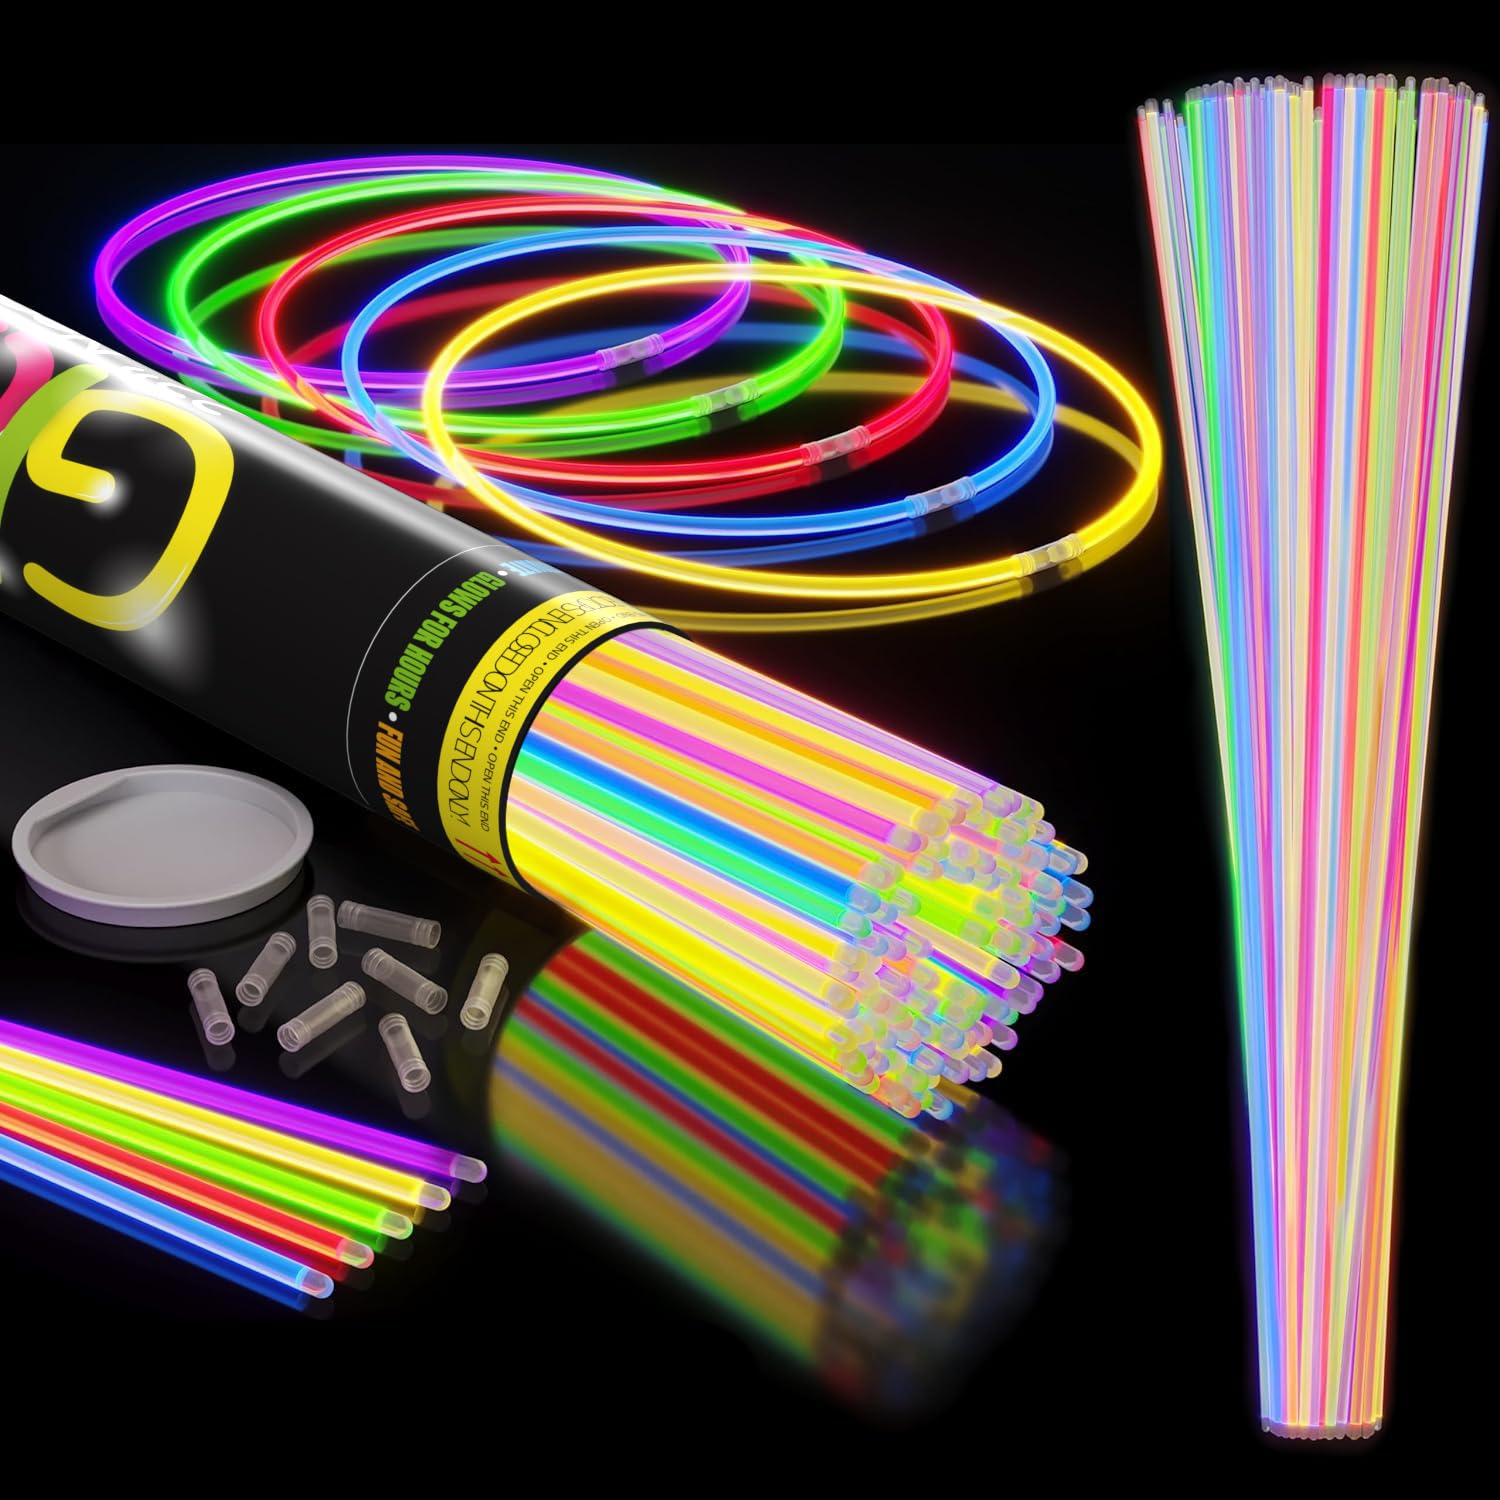 22in. Assorted Glow Necklaces (100)